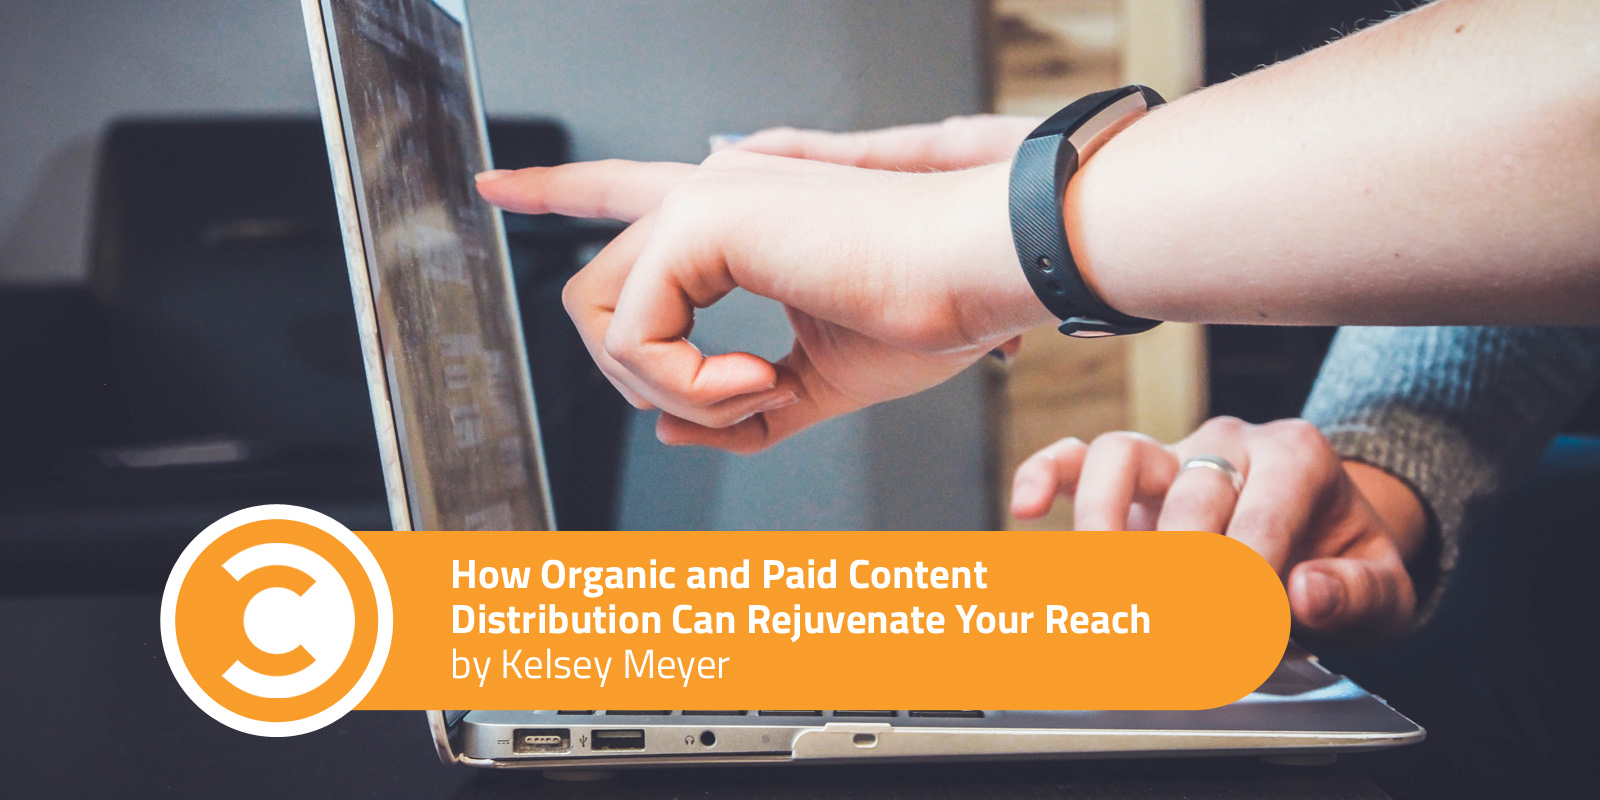 How Organic and Paid Content Distribution Can Rejuvenate Your Reach